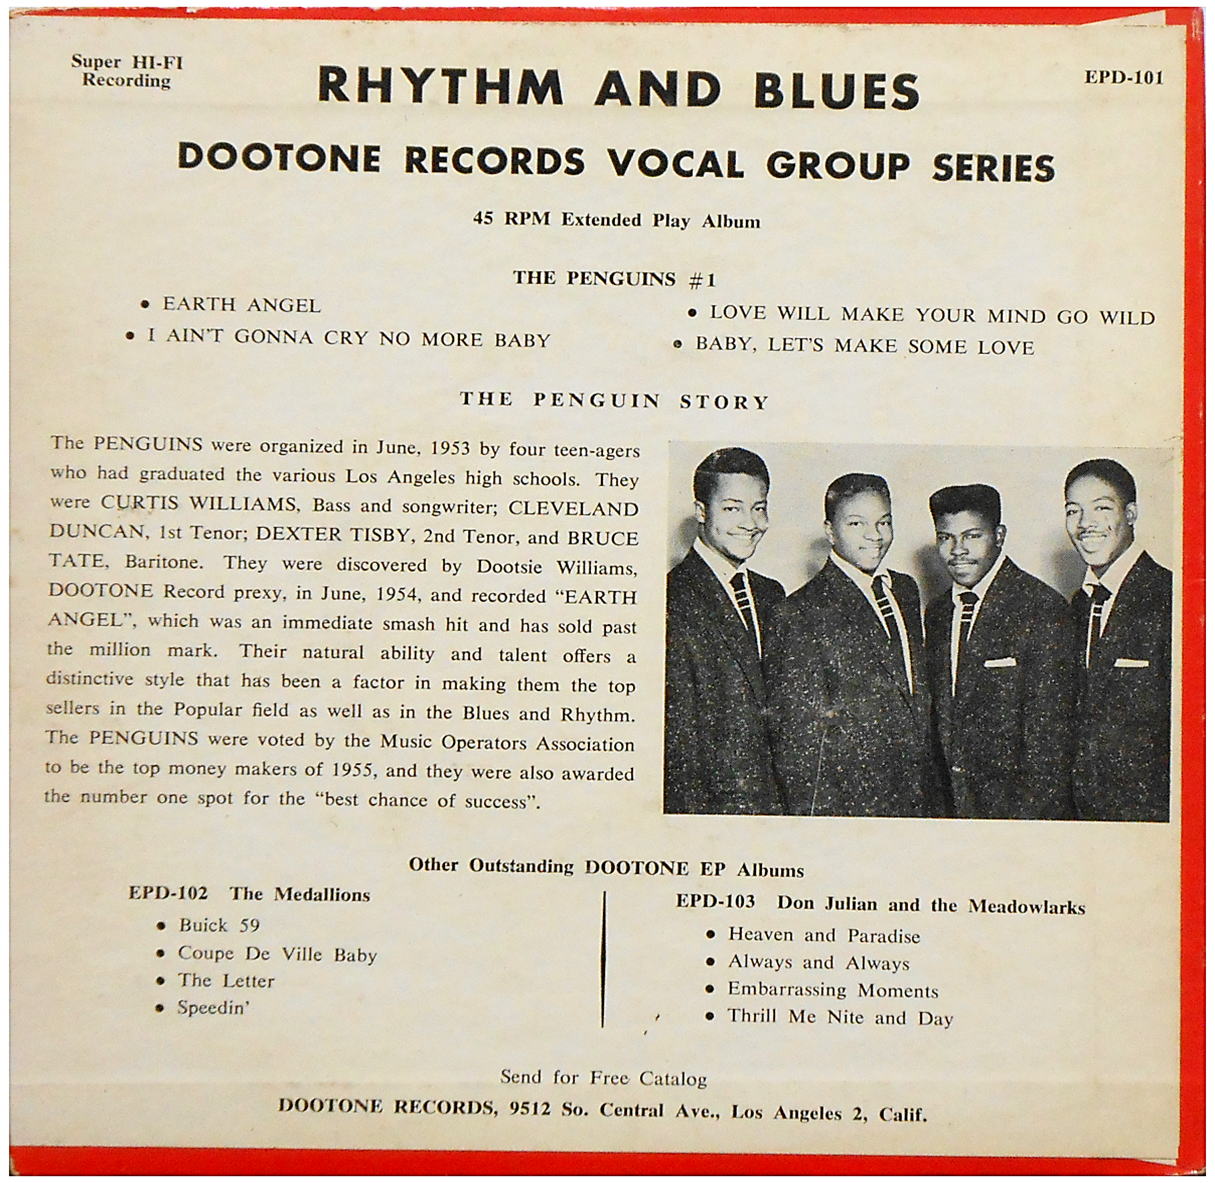 EPD-101 - The Penguins - Rhythm and Blues Back Cover